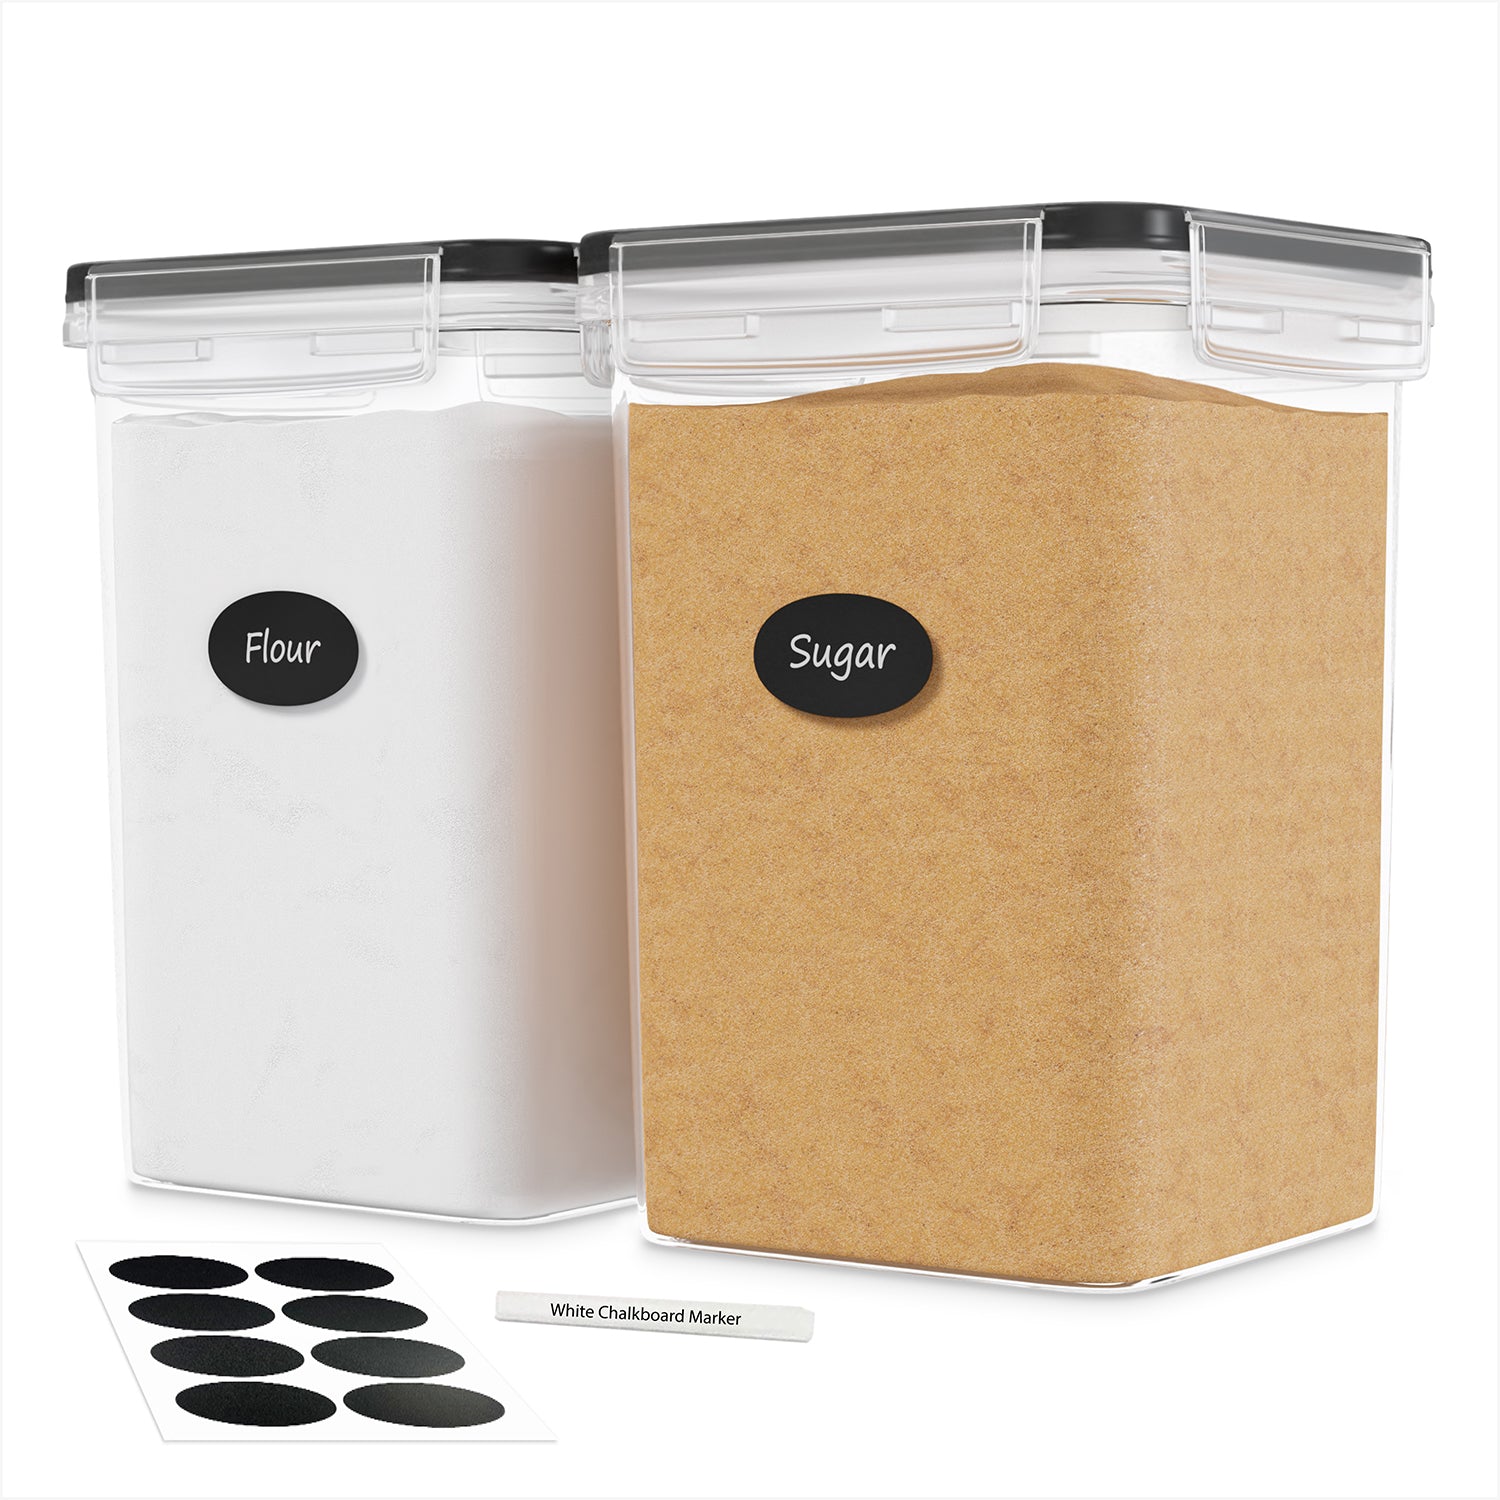 Extra Large Airtight Food Storage Containers - 2 PC 175 oz Each - For –  Dwellza